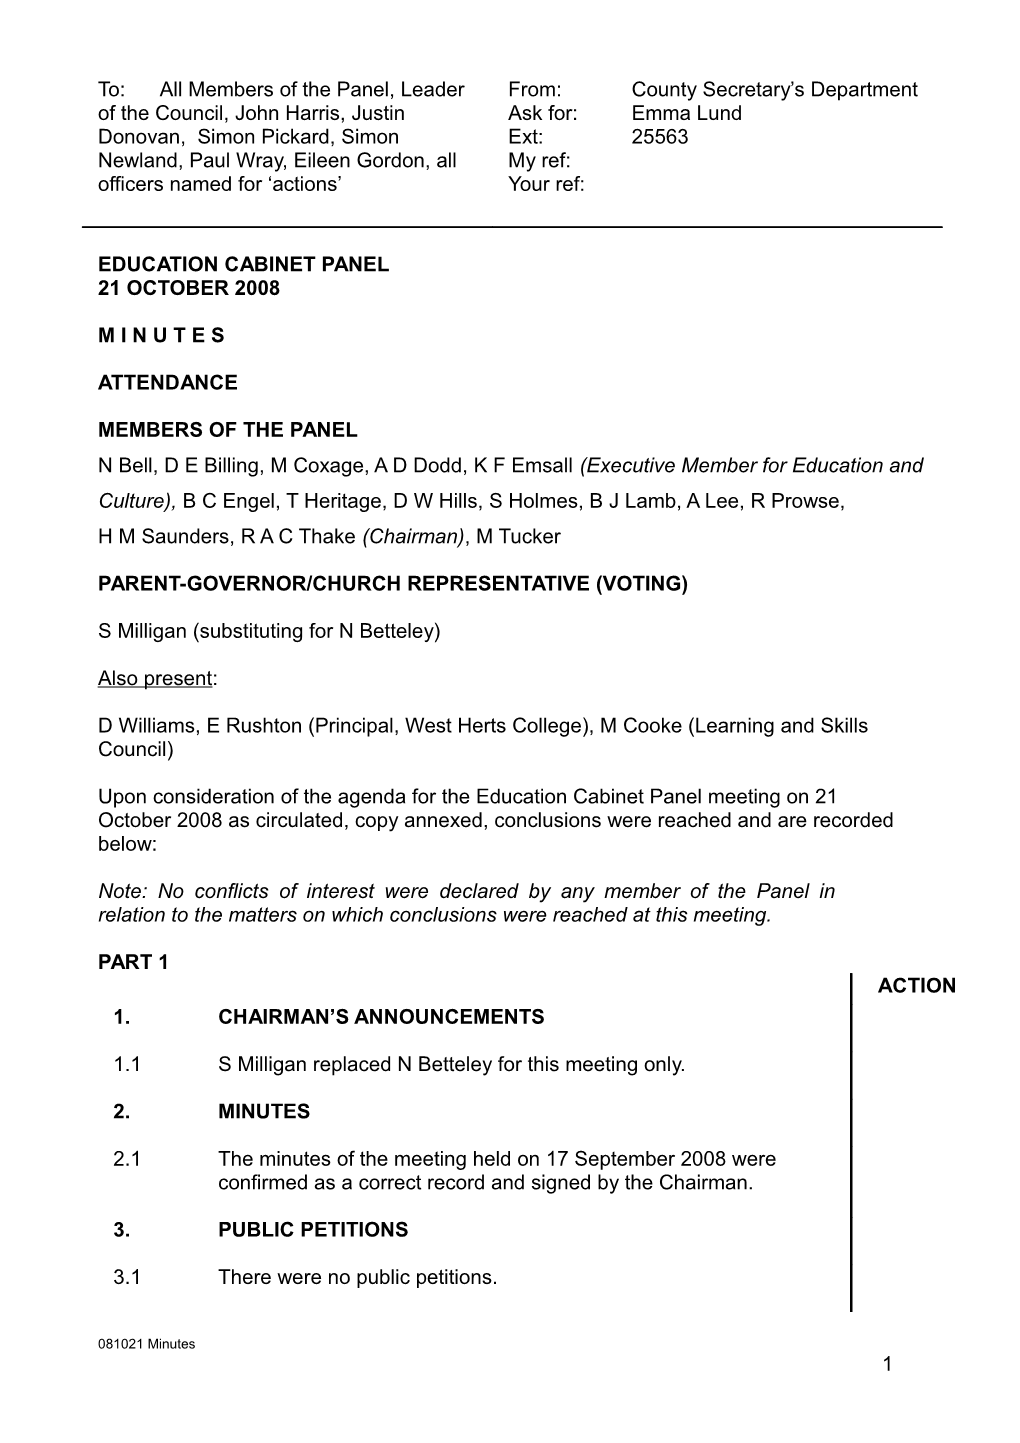 Minutes of the Meeting of the Education Cabinet Panel Held on Tuesday 21 October 2008